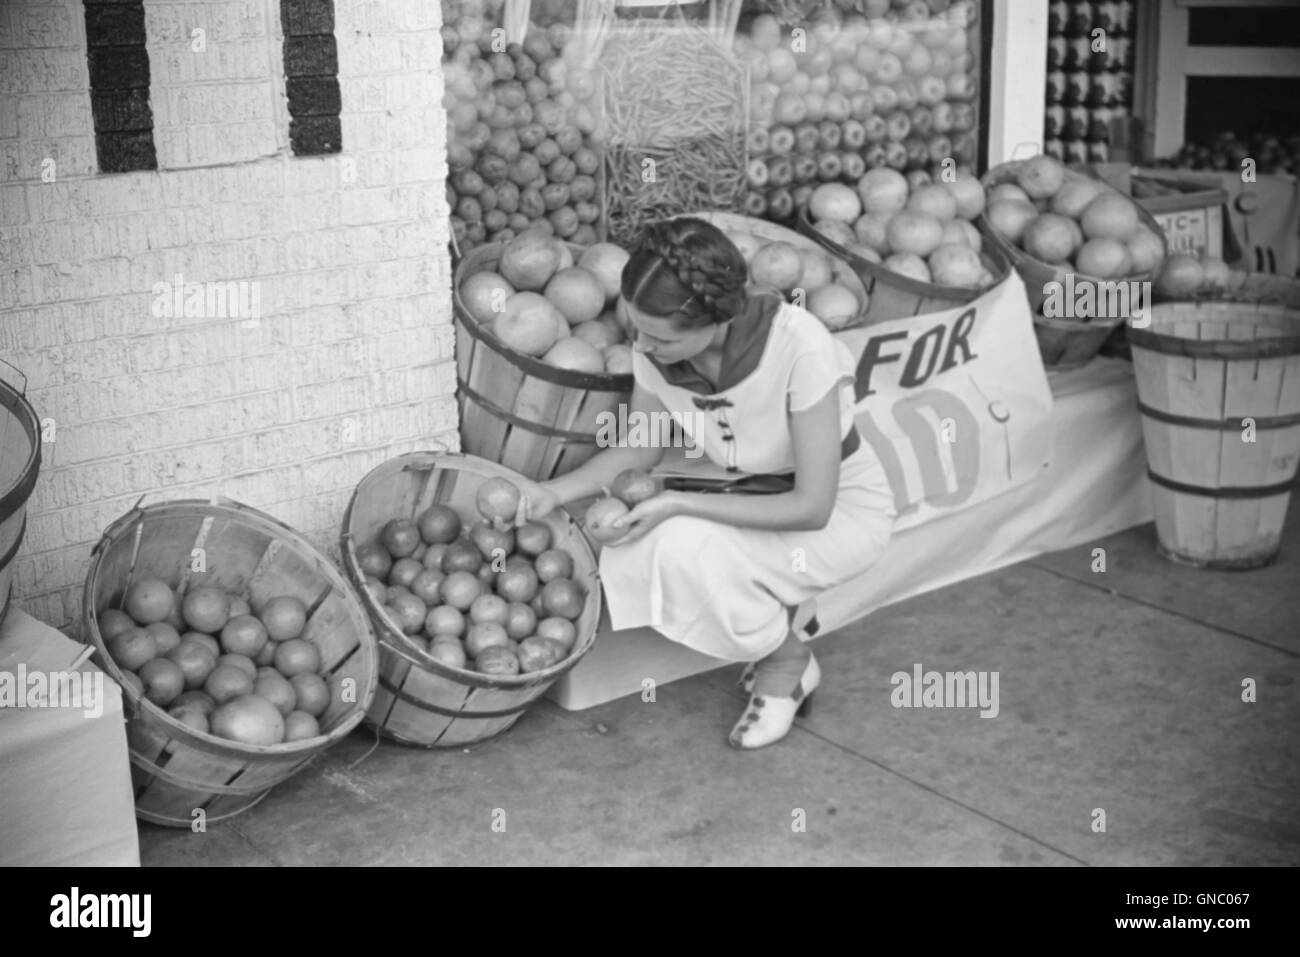 Woman Shopping at Grocery Store, Lakeland, Floride, USA, Marion Post Wolcott pour Farm Security Administration, Mars 1939 Banque D'Images